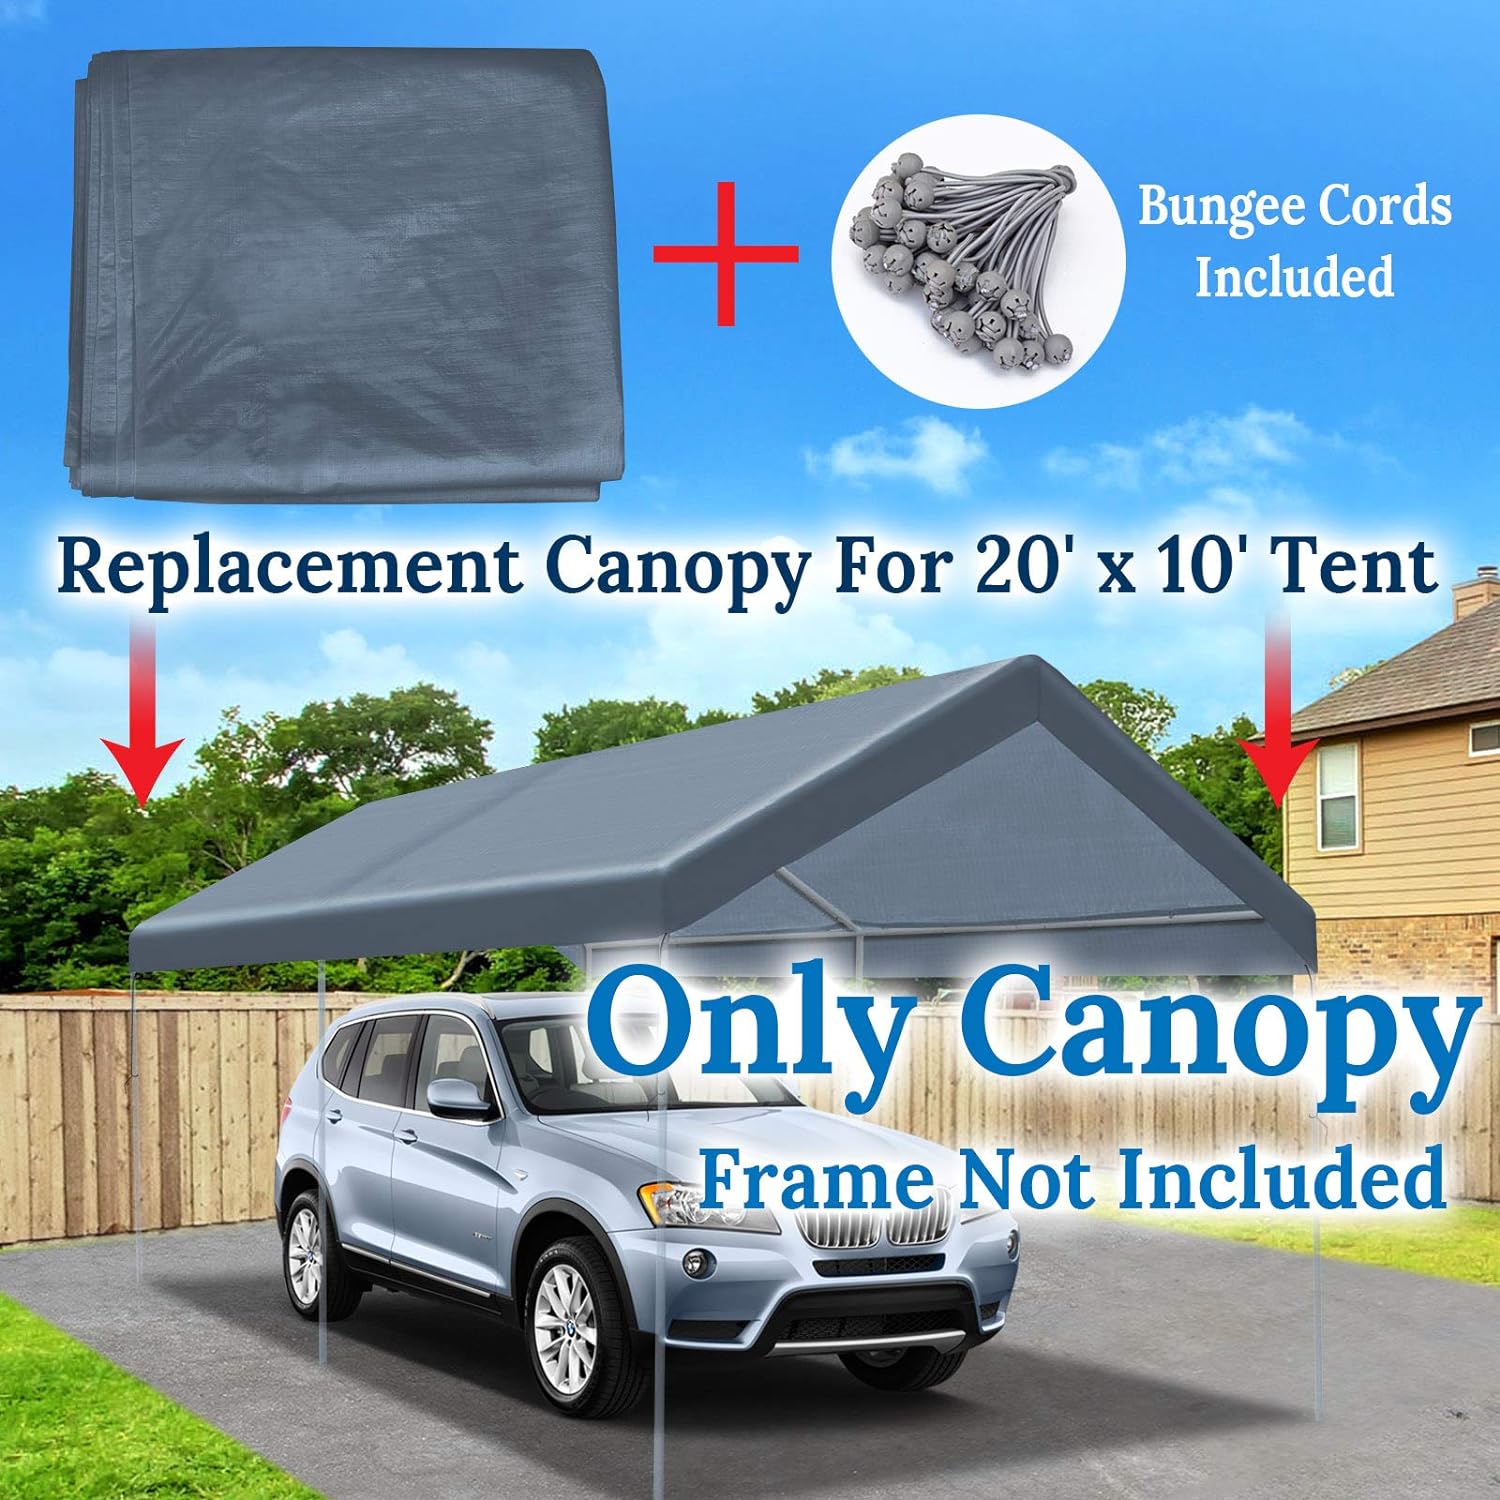 Benefit-USA BenefitUSA Canopy ONLY 10'x20' Carport Replacement Canopy Outdoor Tent Garage Top Tarp Shelter Cover w Ball Bungees (Grey)